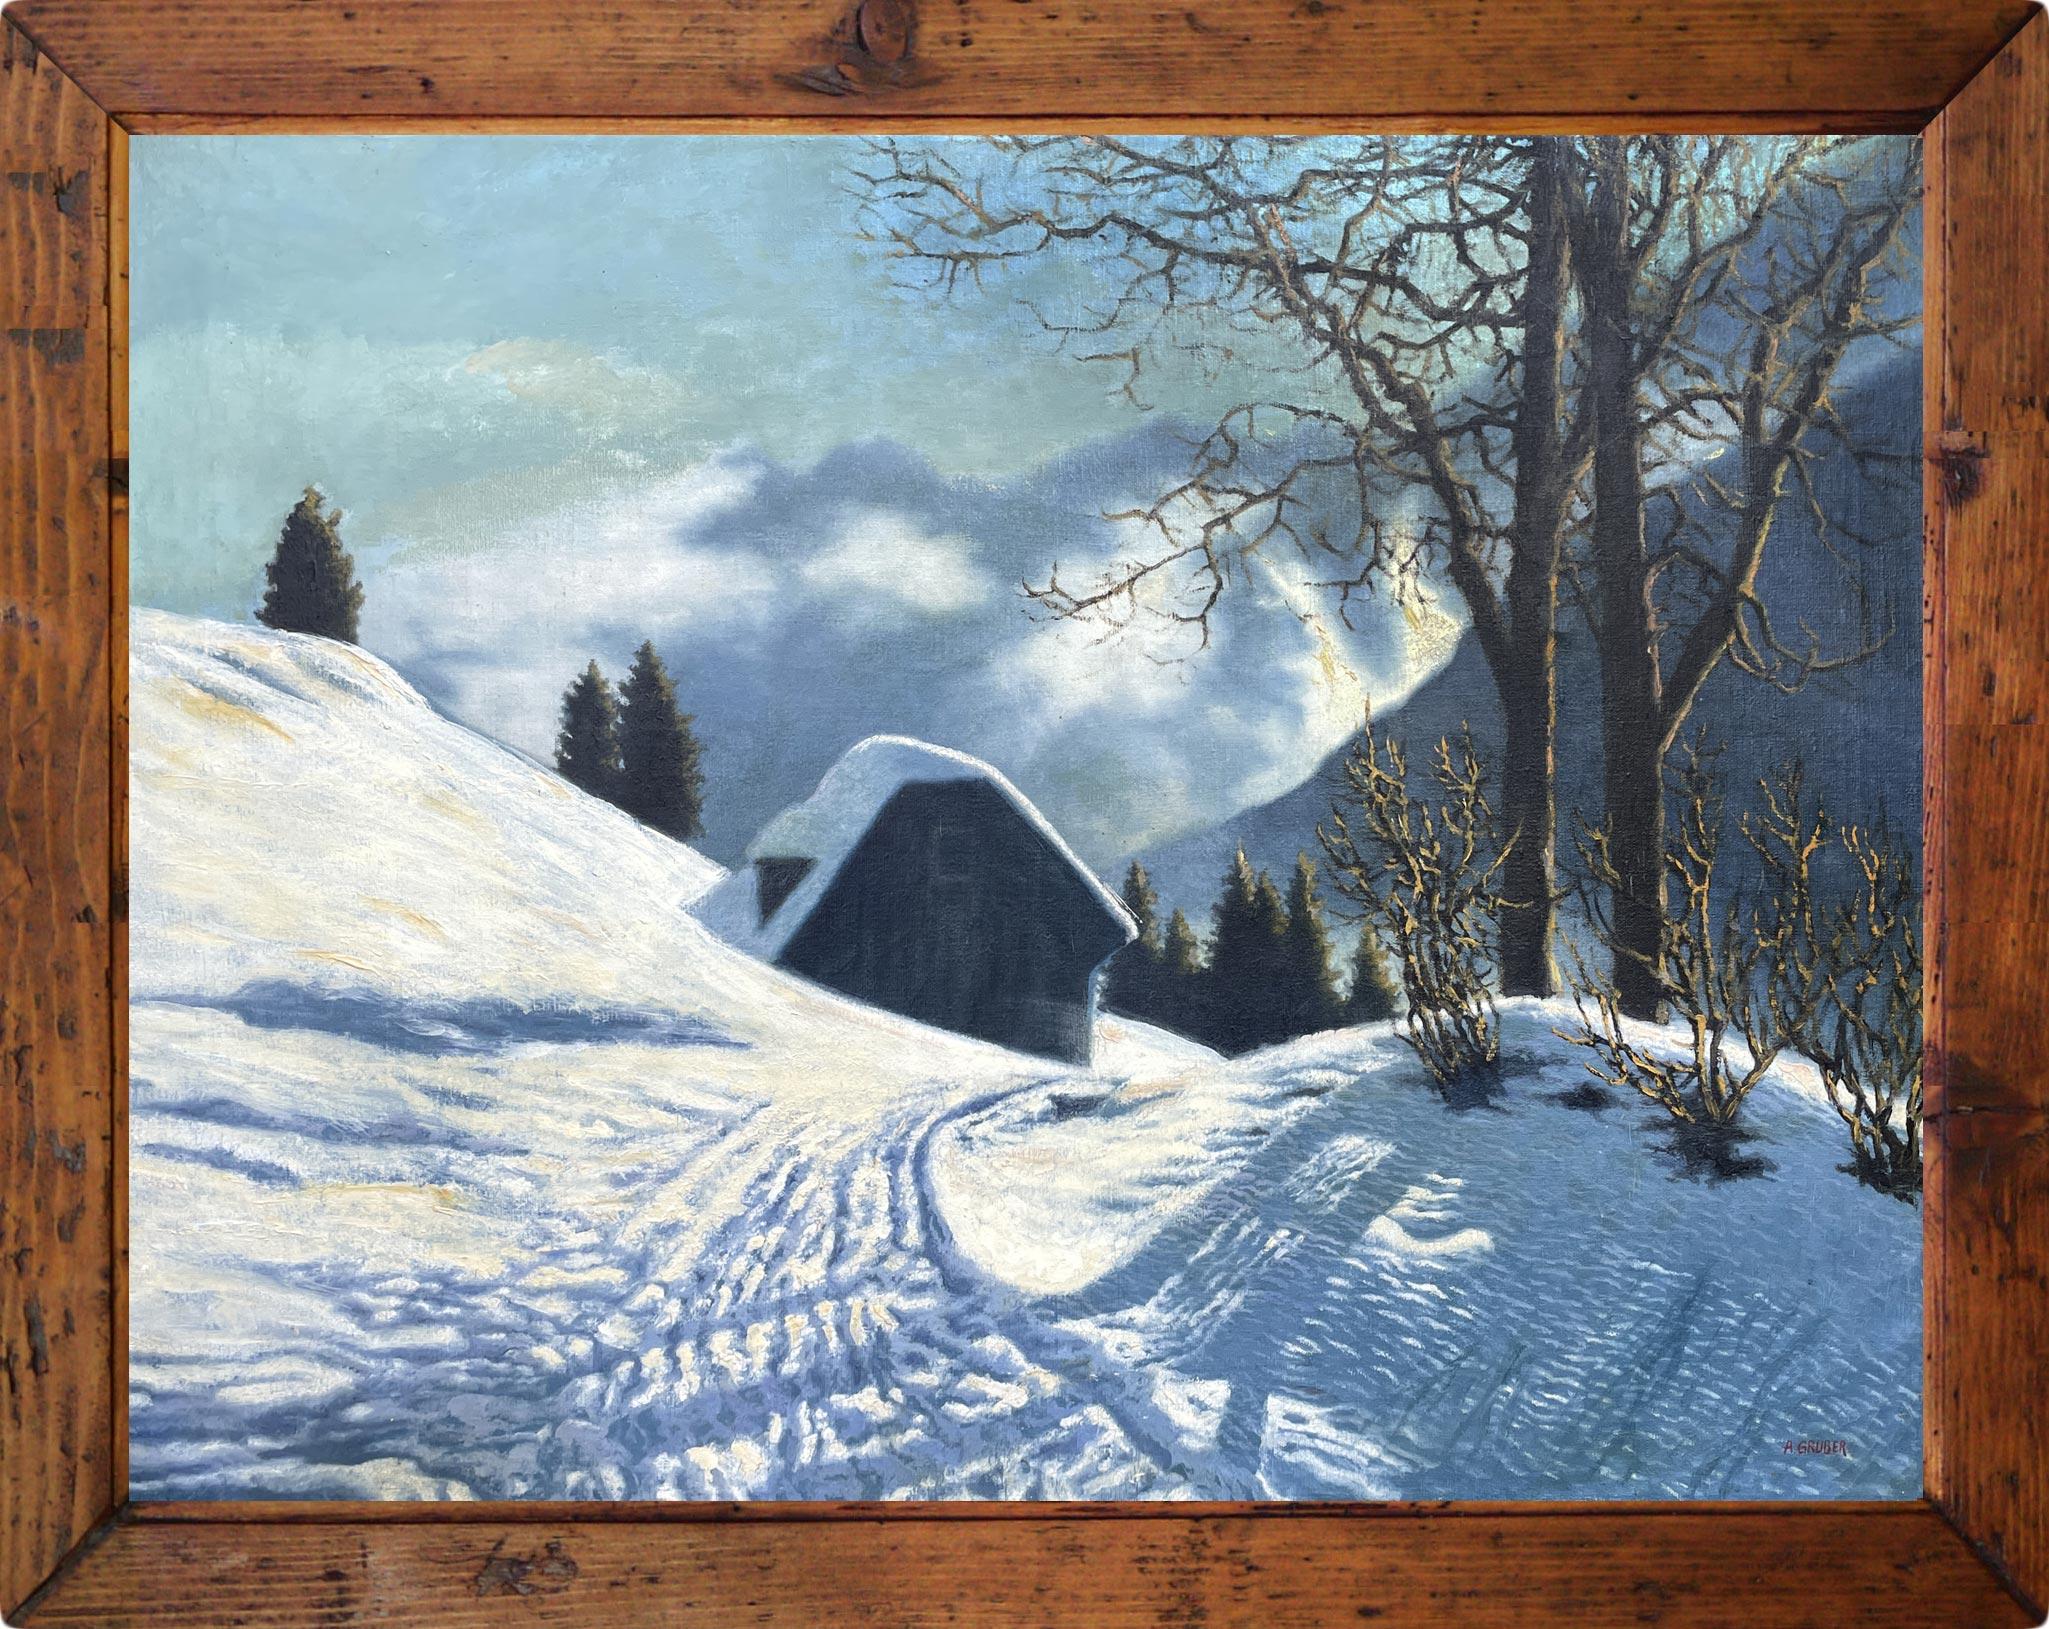 Hut in the Snowy Forest - Albert Gruber

70 x 90 cm without frame
88 x 108 cm with antique fir frame
oil on panel - around 1940

Painting with generous dimensions, depicting an alpine cabin immersed in the snow.
The atmosphere created by the